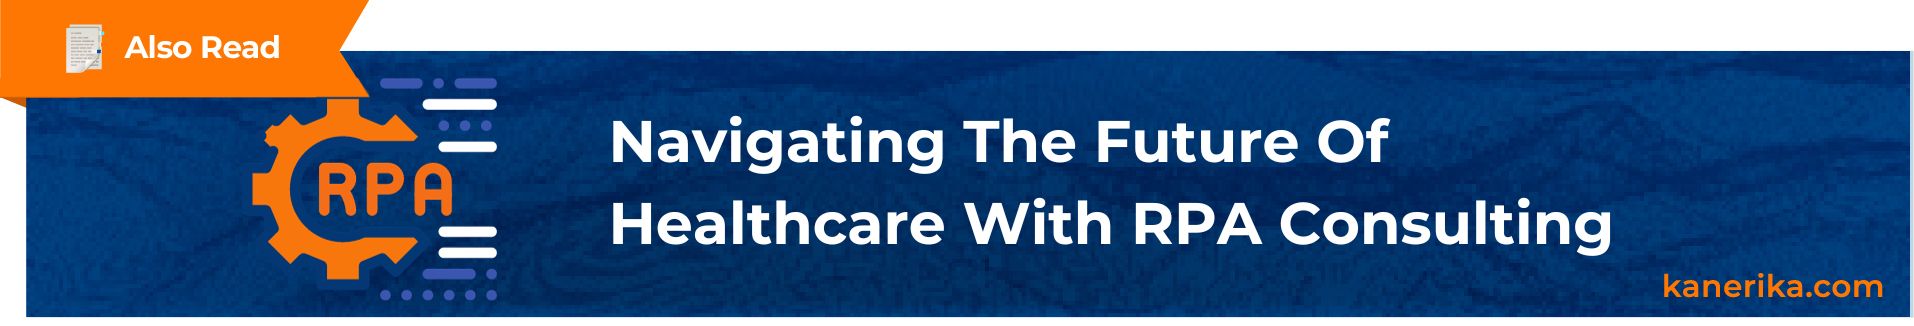 Case Study - Navigating The Future Of Healthcare With RPA Consulting